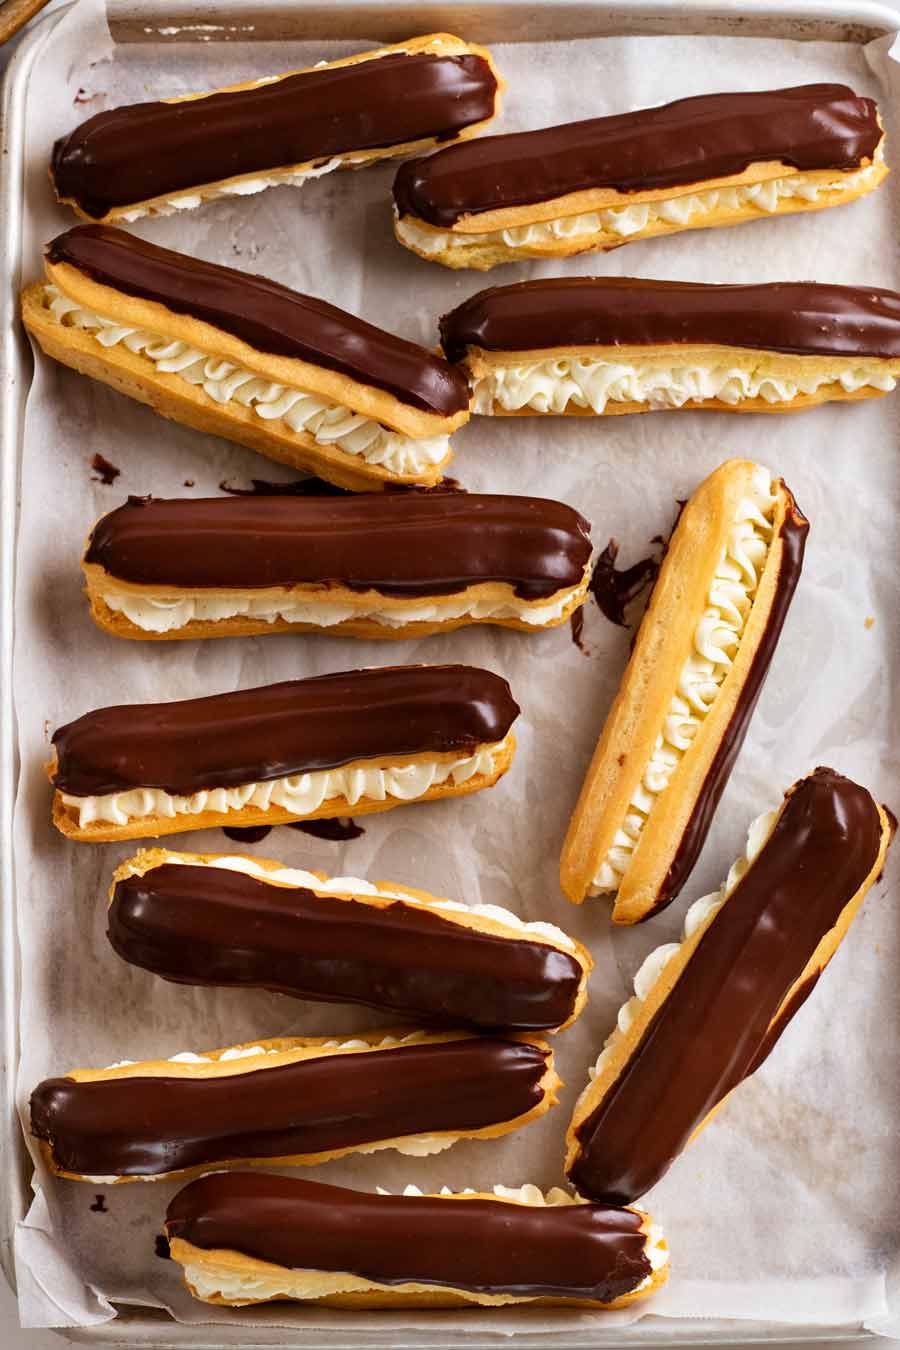 Tray of Eclairs